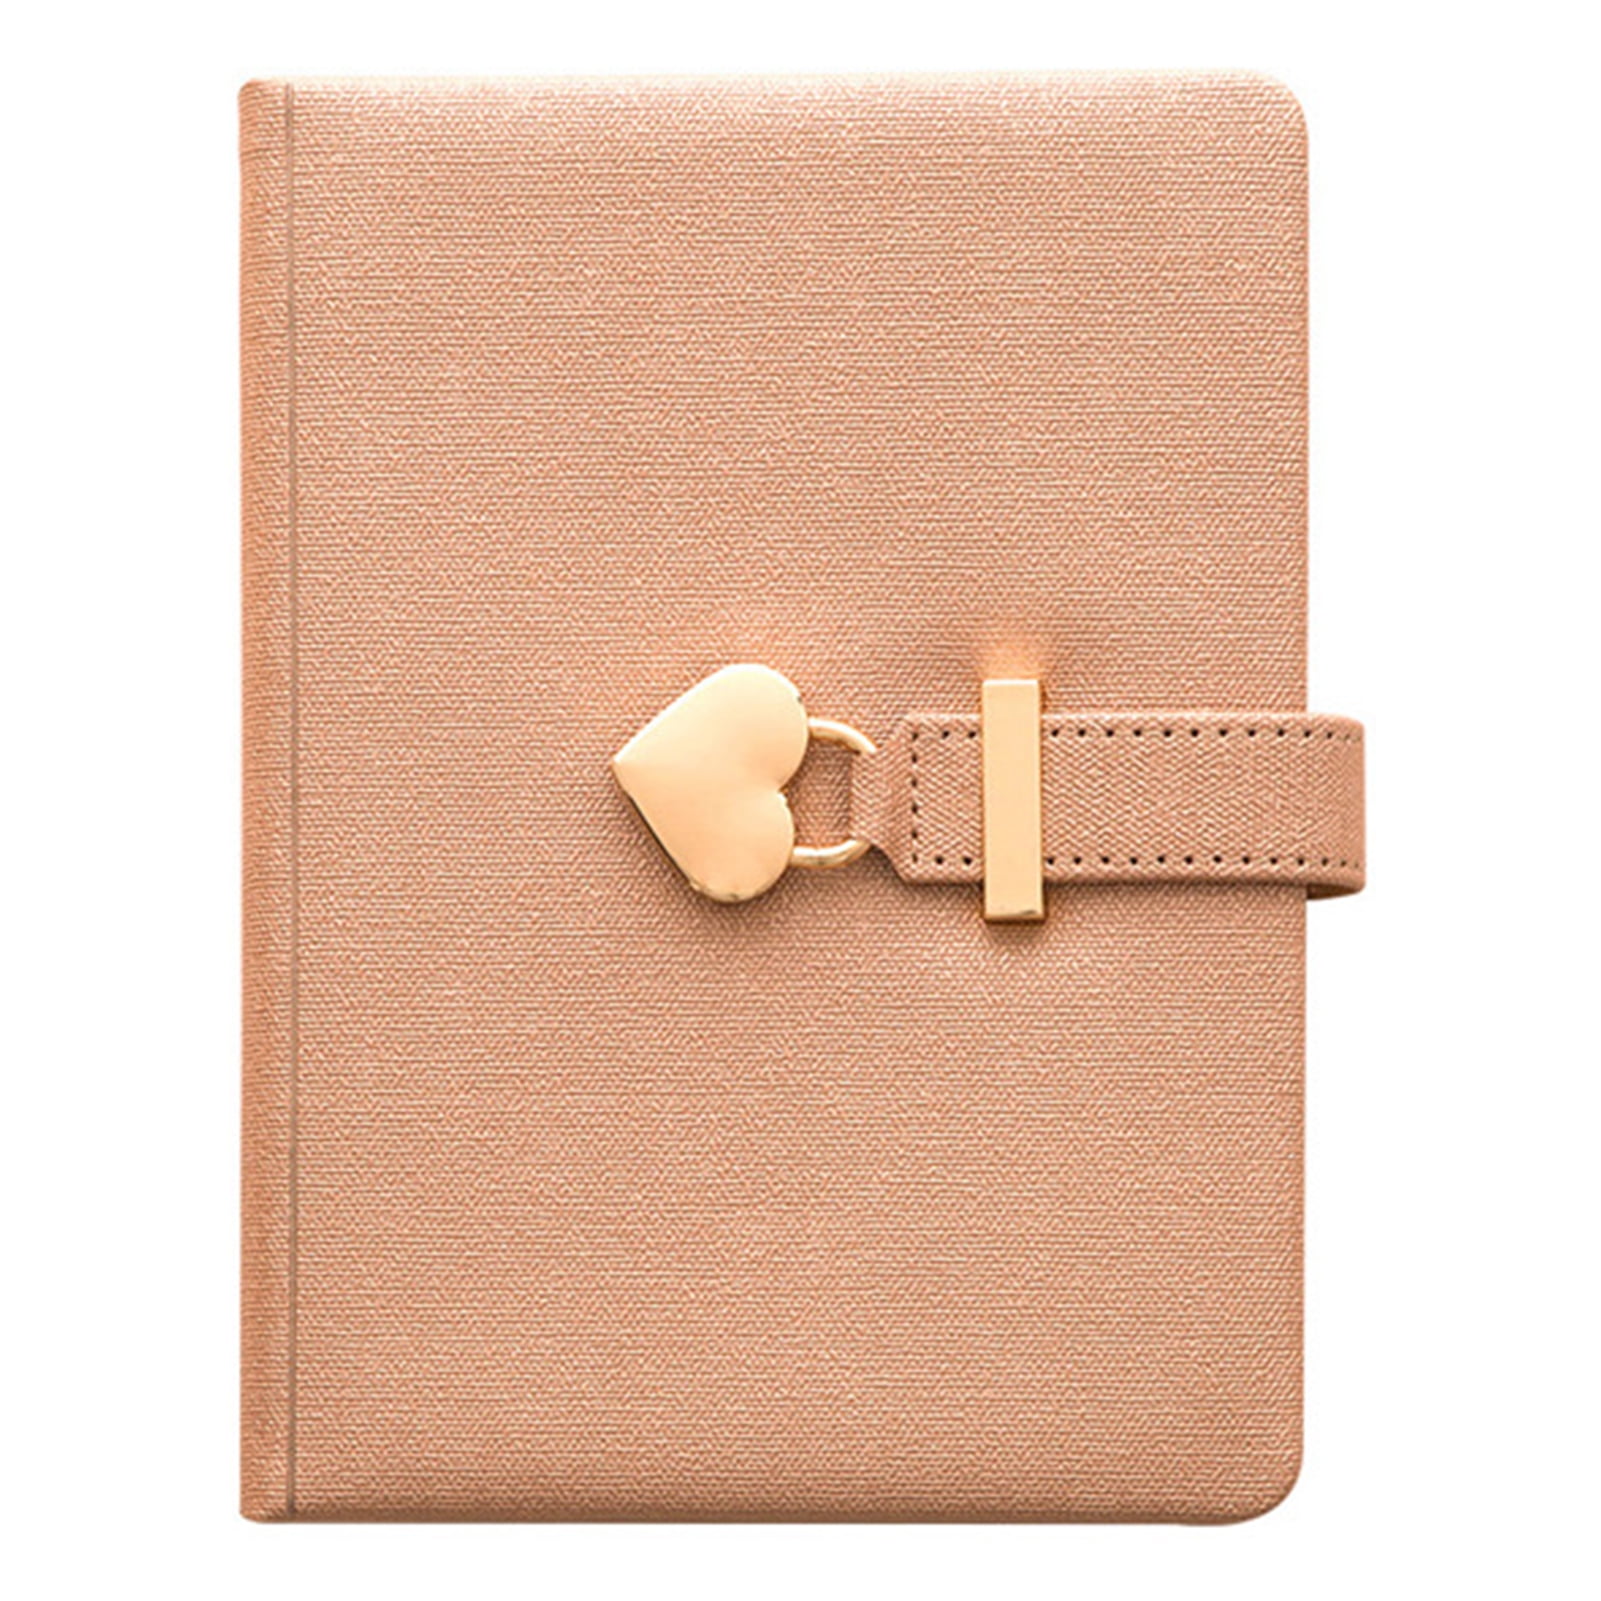 Champaign Diary Poshieca Heart Shaped Lock Diary with Key PU Leather Cover Journal Personal Organizers Secret Notebook for Girls & Women B6 Size 5.3x7inch Diary 